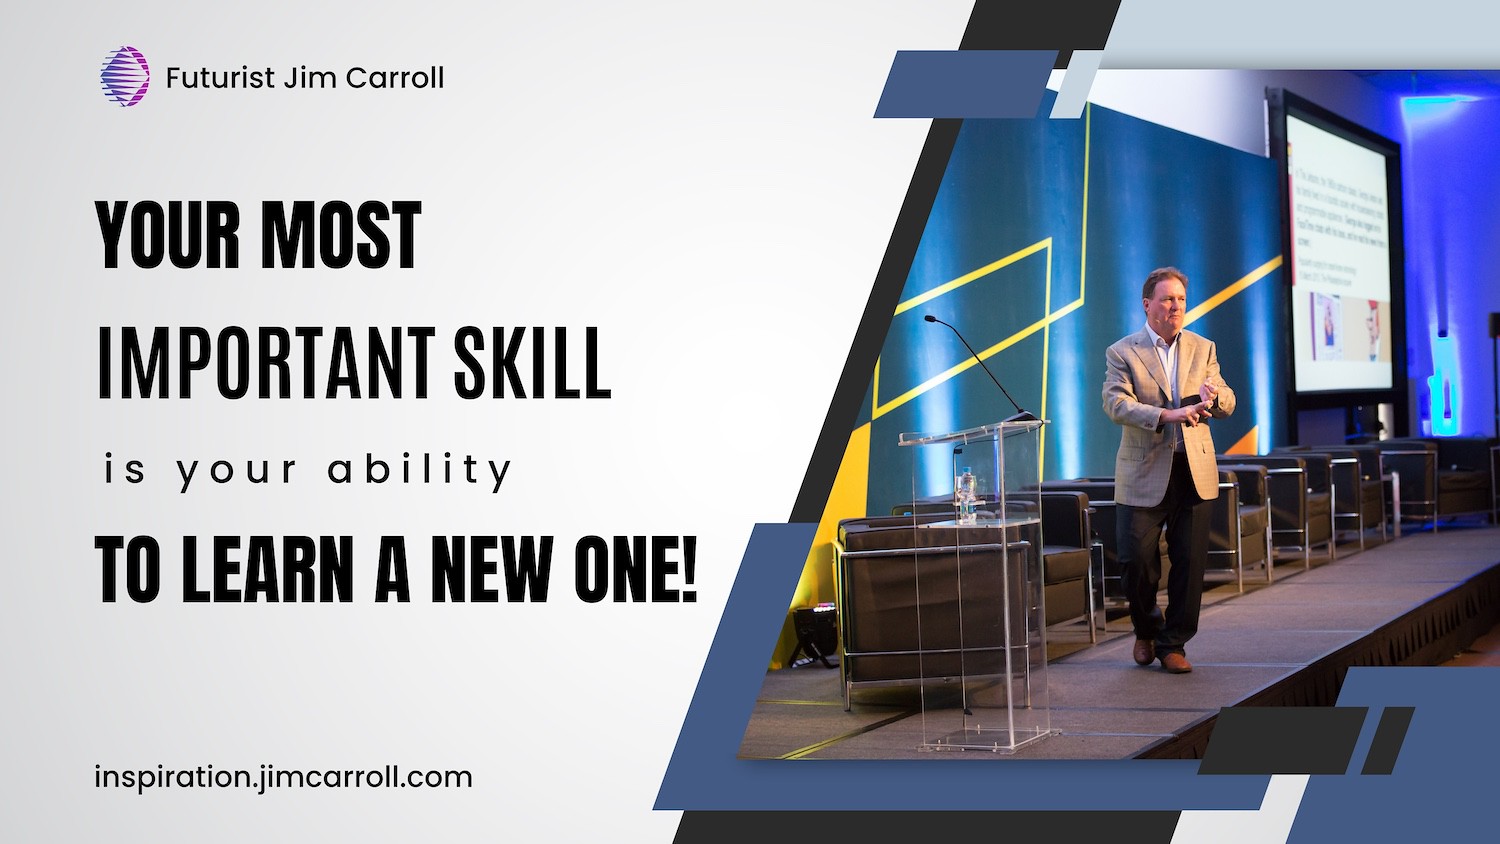 "Your most important skill is your ability to learn a new one!" - Futurist Jim Carroll